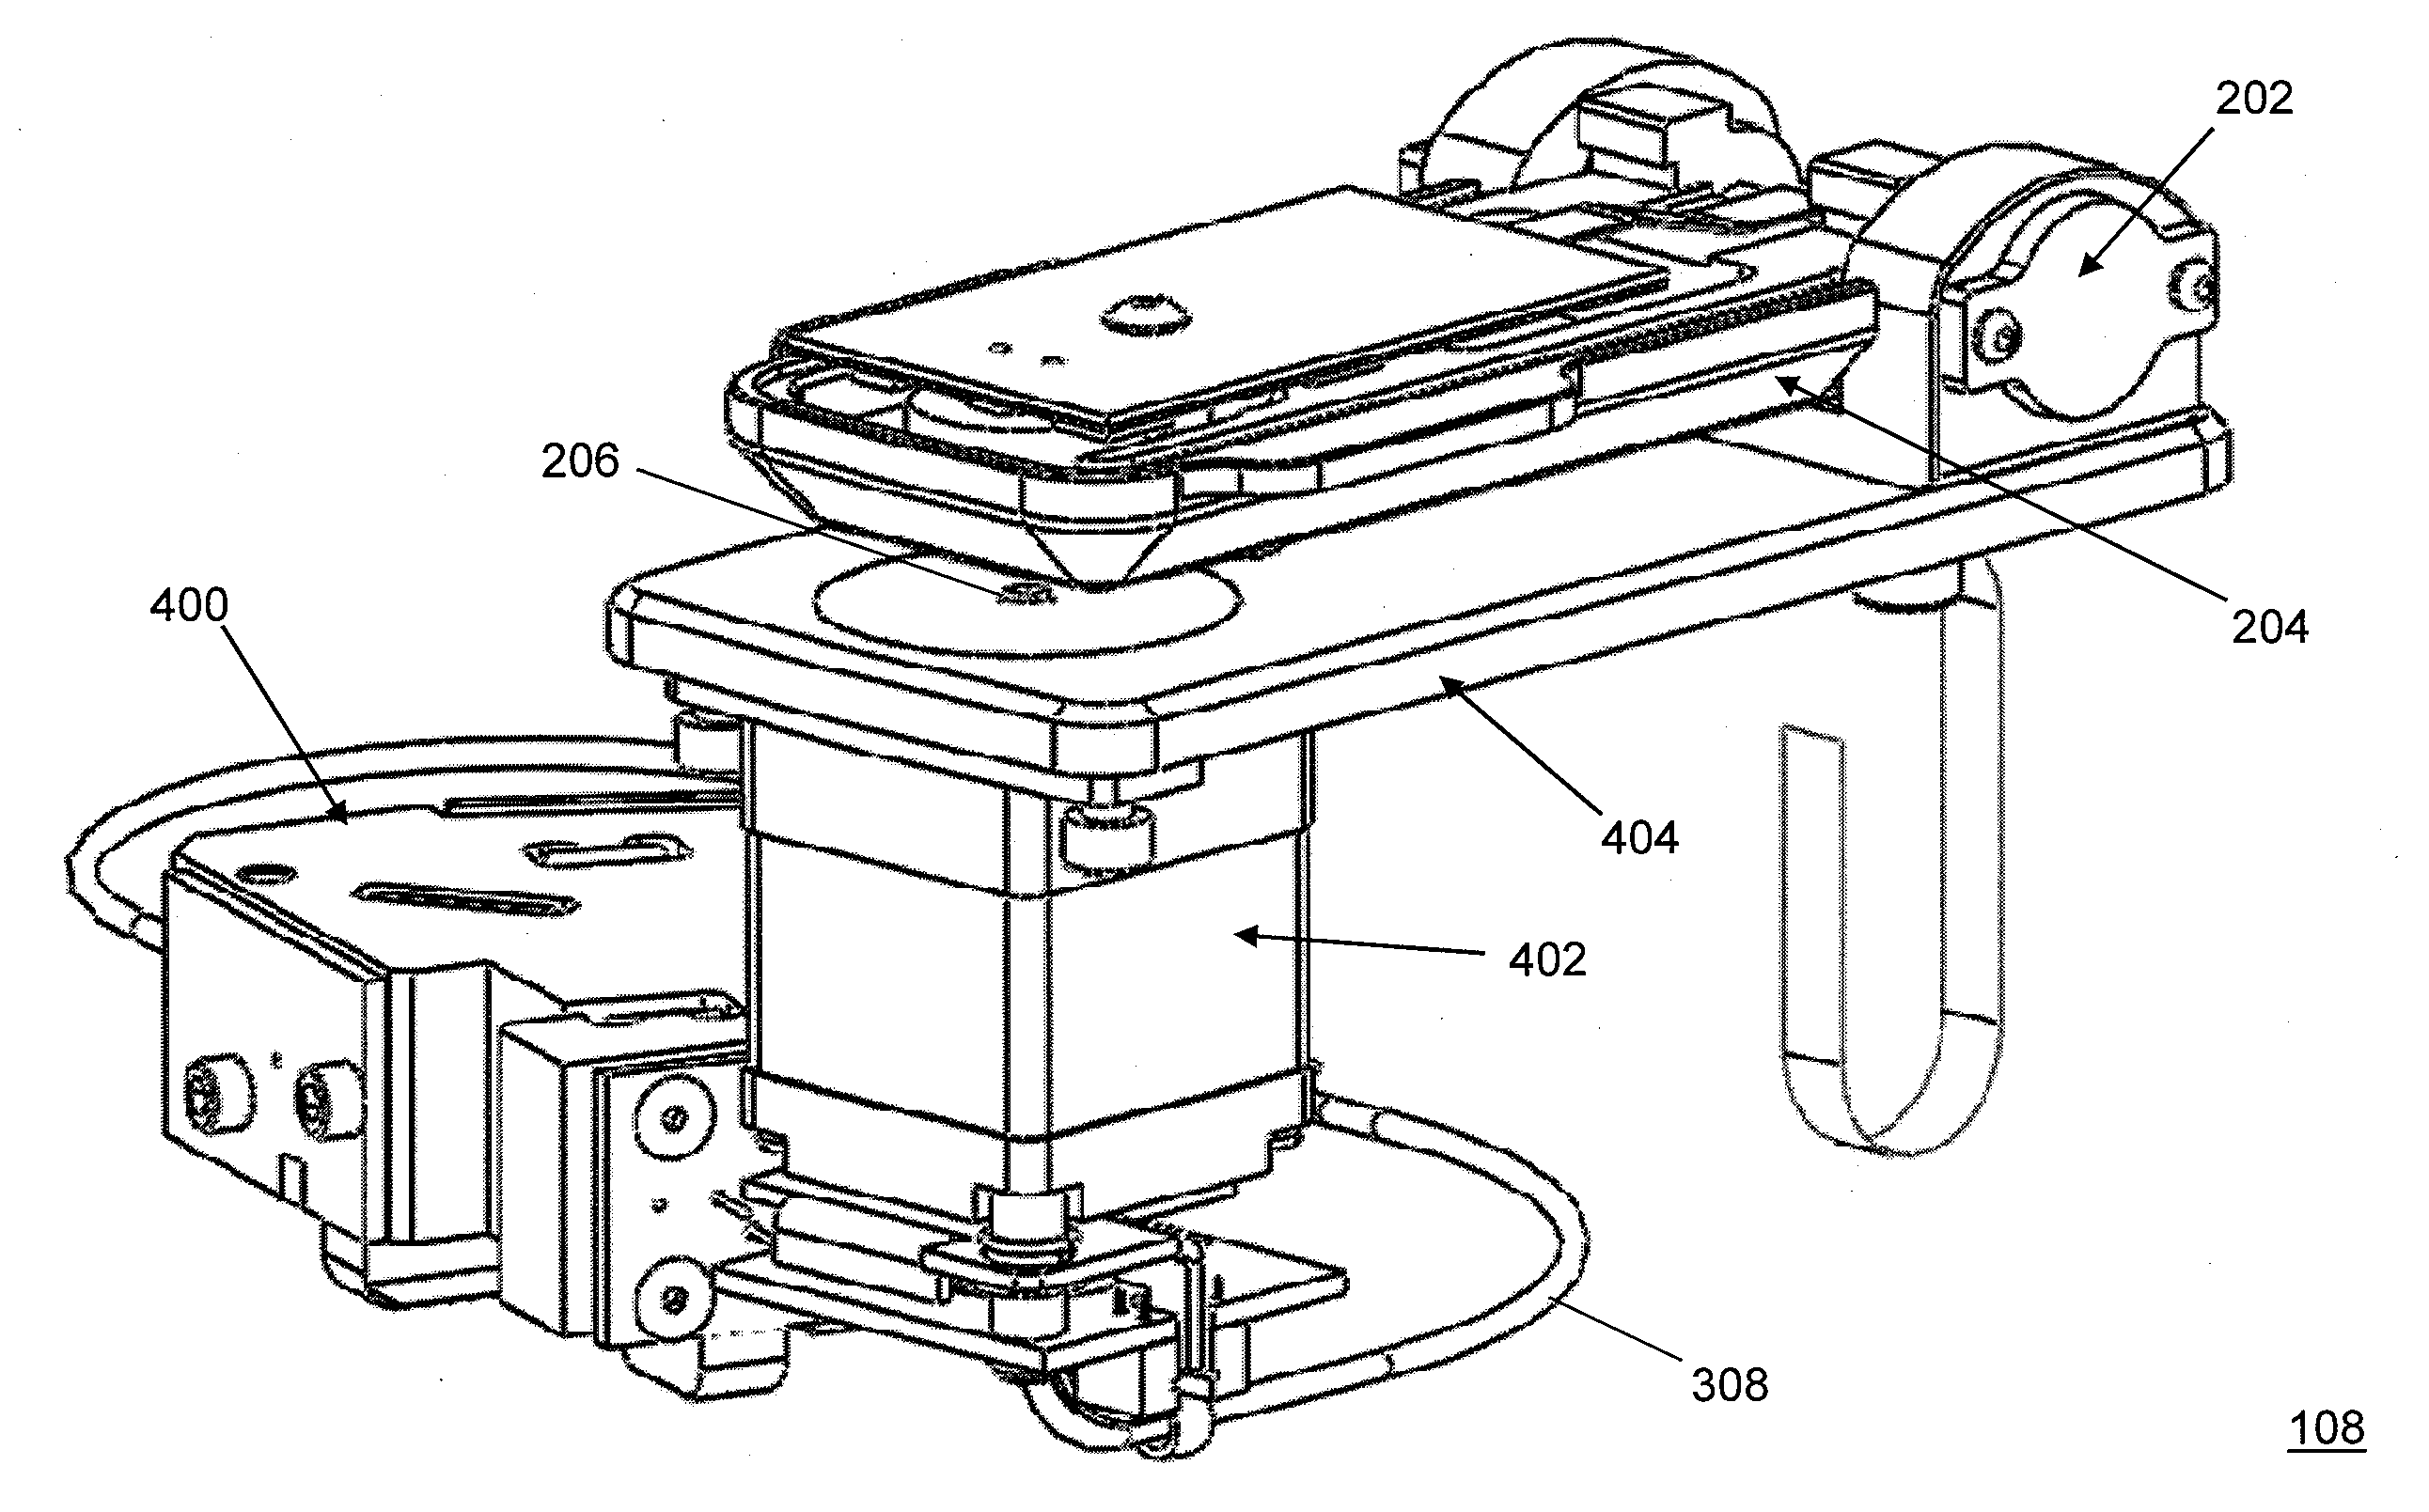 Optical Spectrometer with Underfilled Fiber Optic Sample Interface